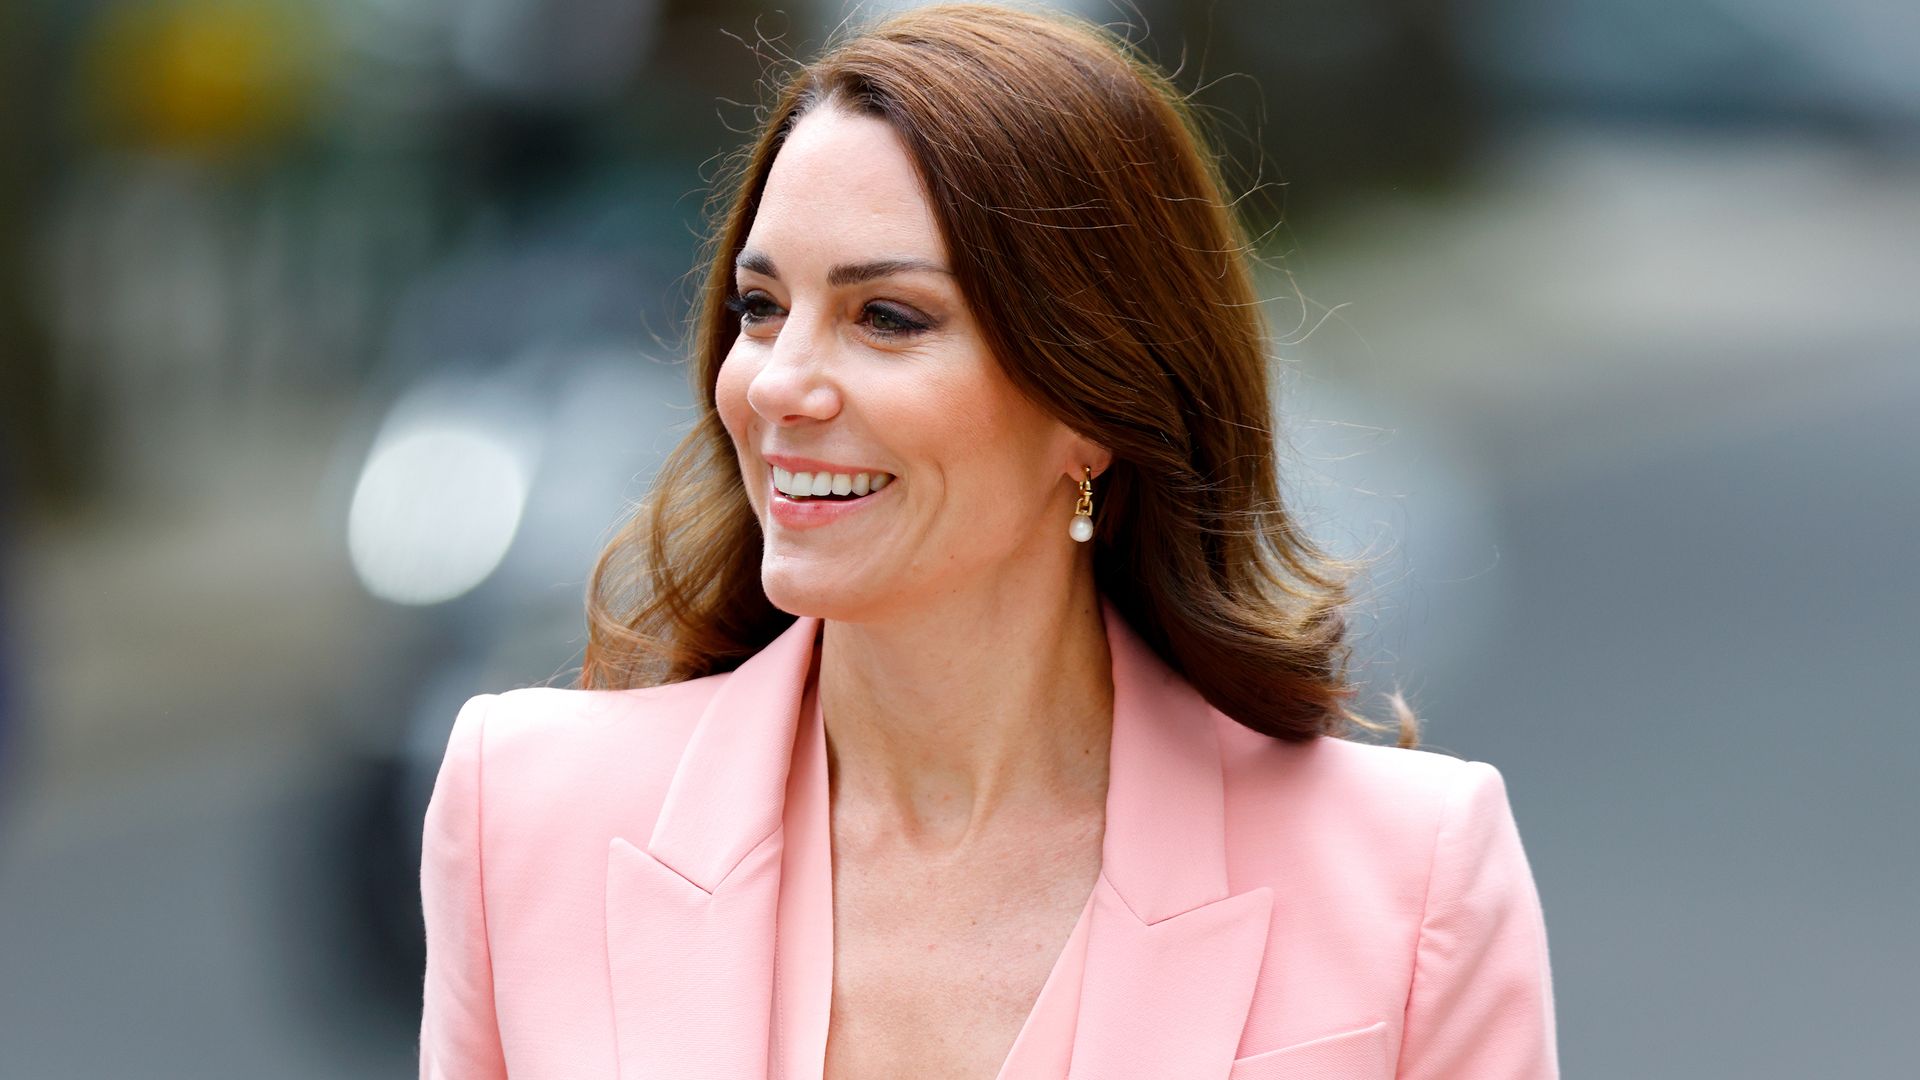 Princess Kate smiling looking stylish in a pink blazer